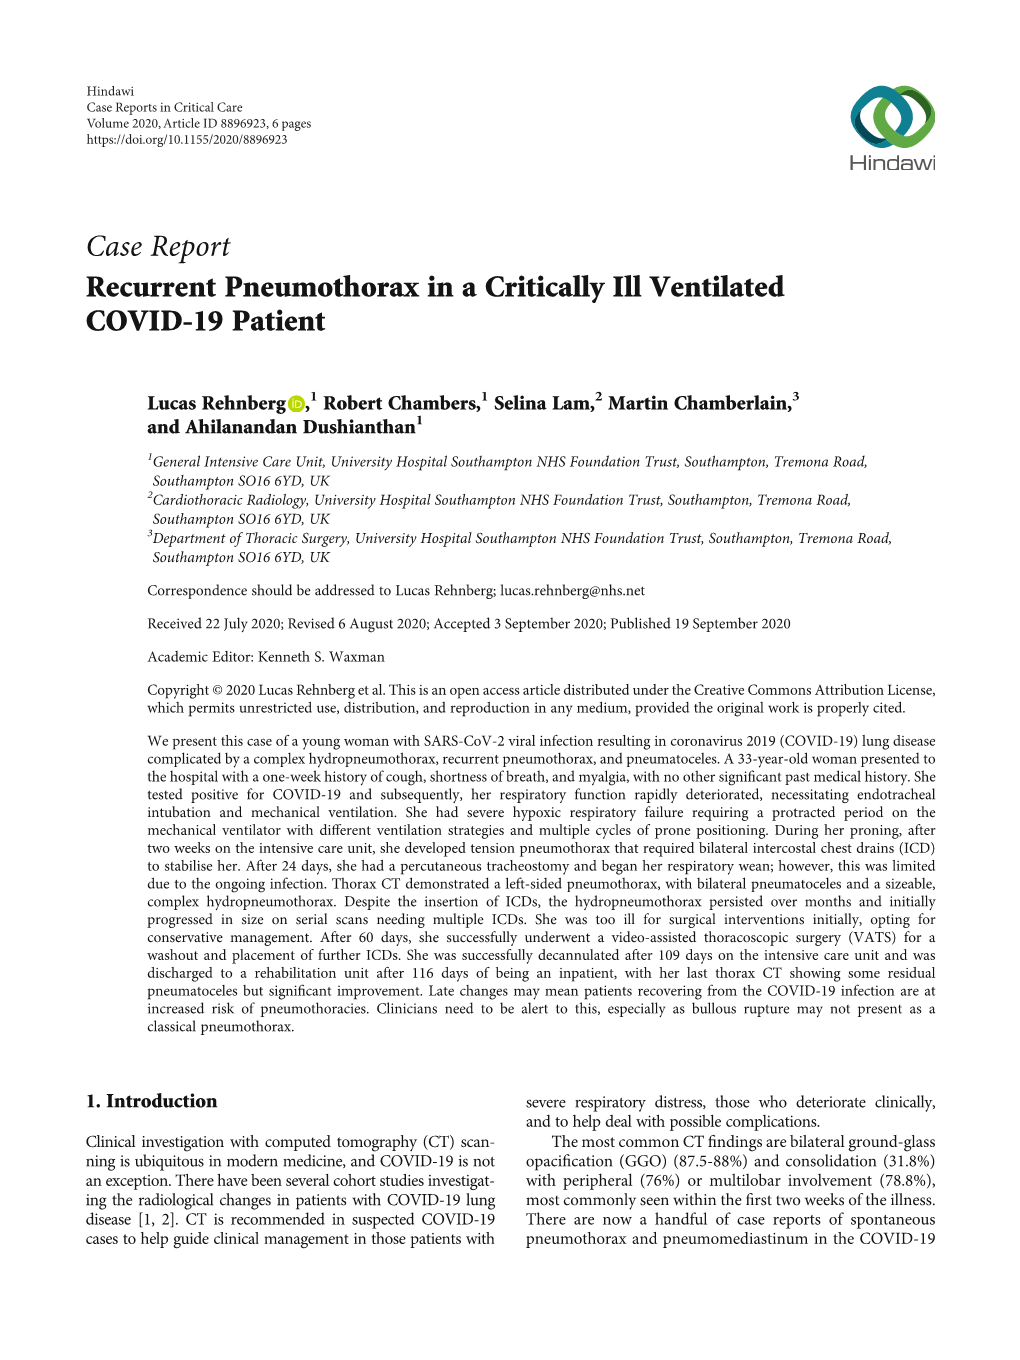 Case Report Recurrent Pneumothorax in a Critically Ill Ventilated COVID-19 Patient